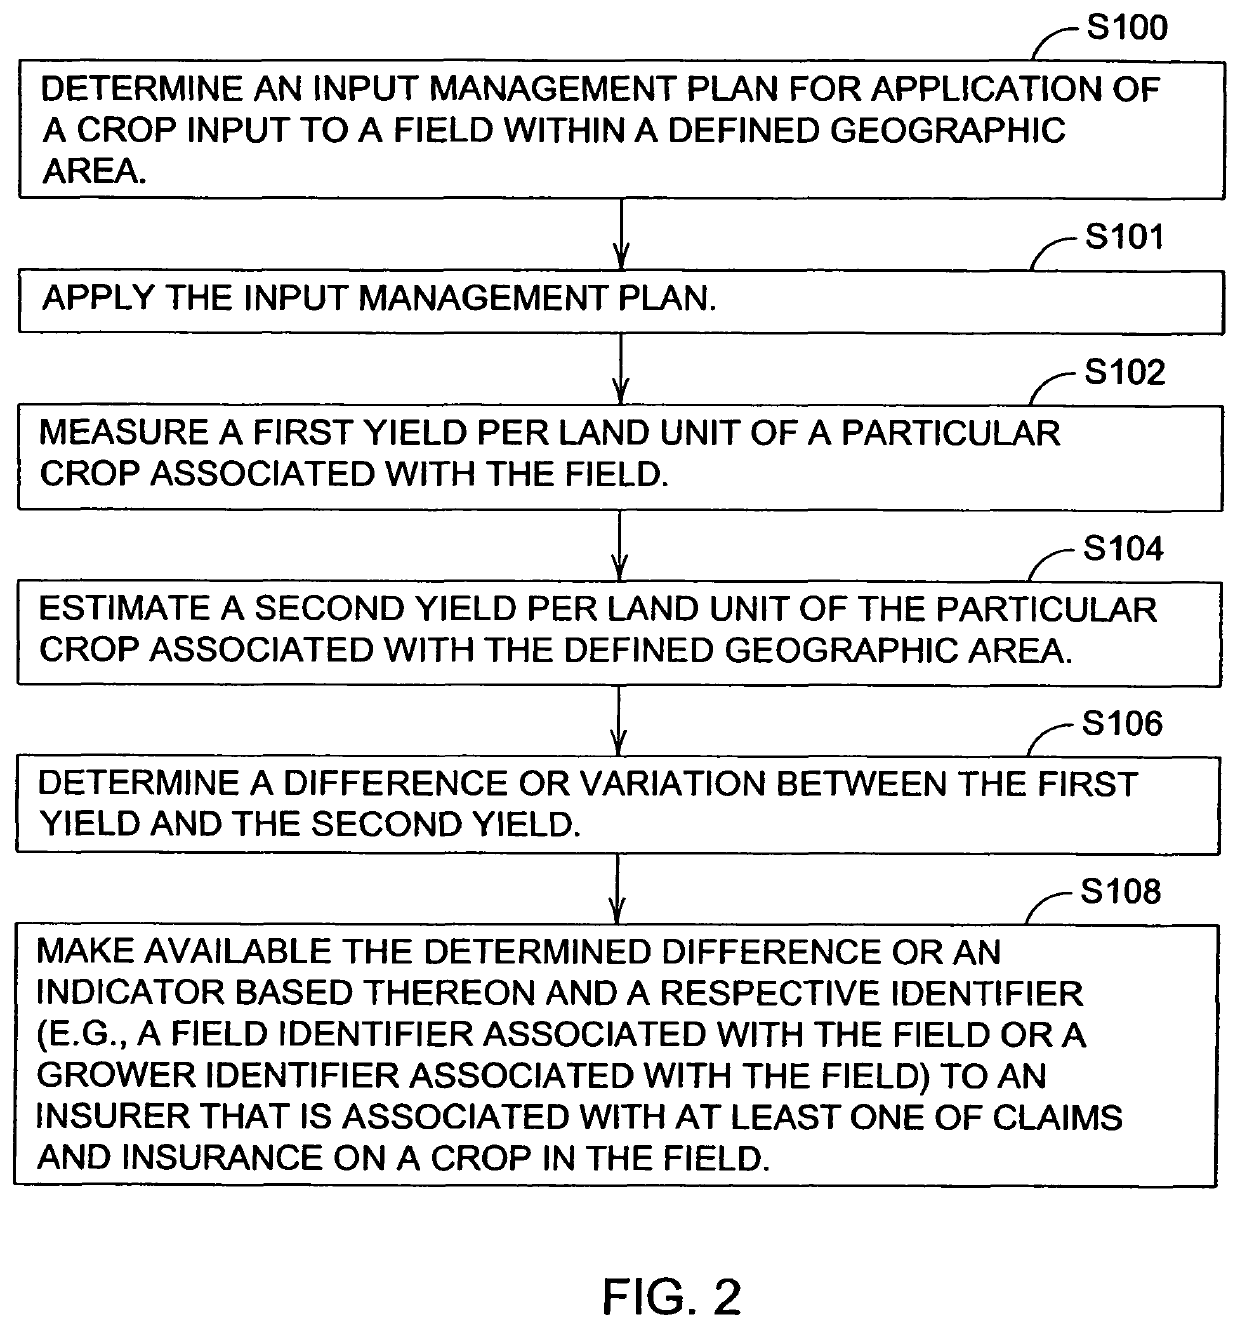 Risk management on the application of crop inputs